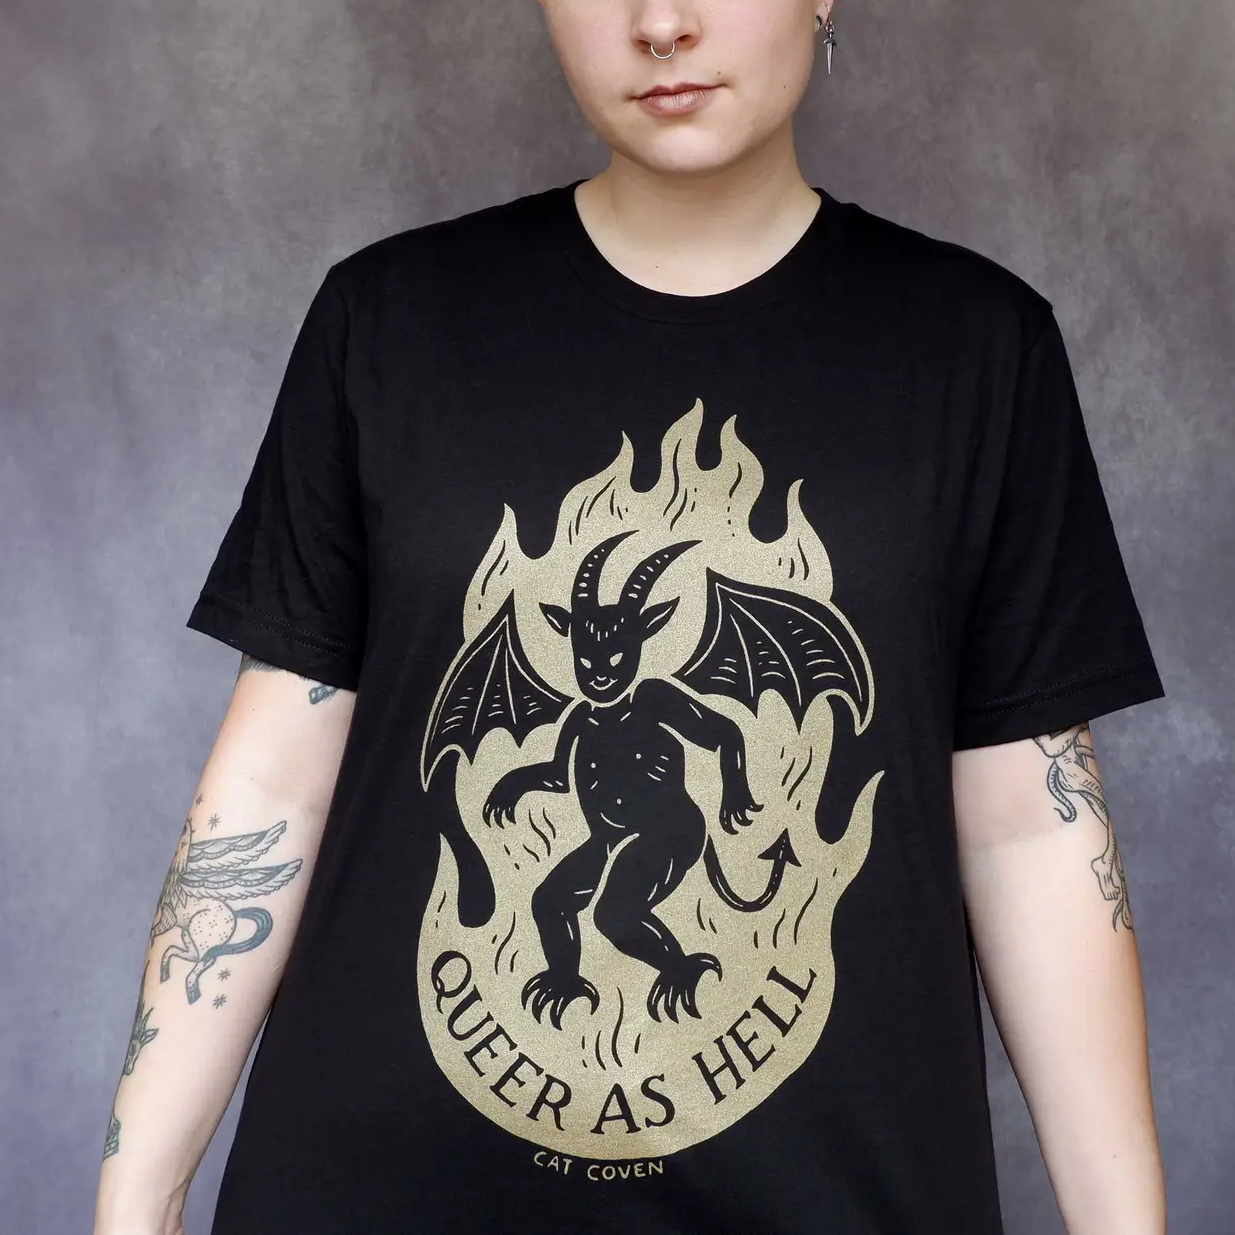 CAT COVEN QUEER AS HELL T SHIRT